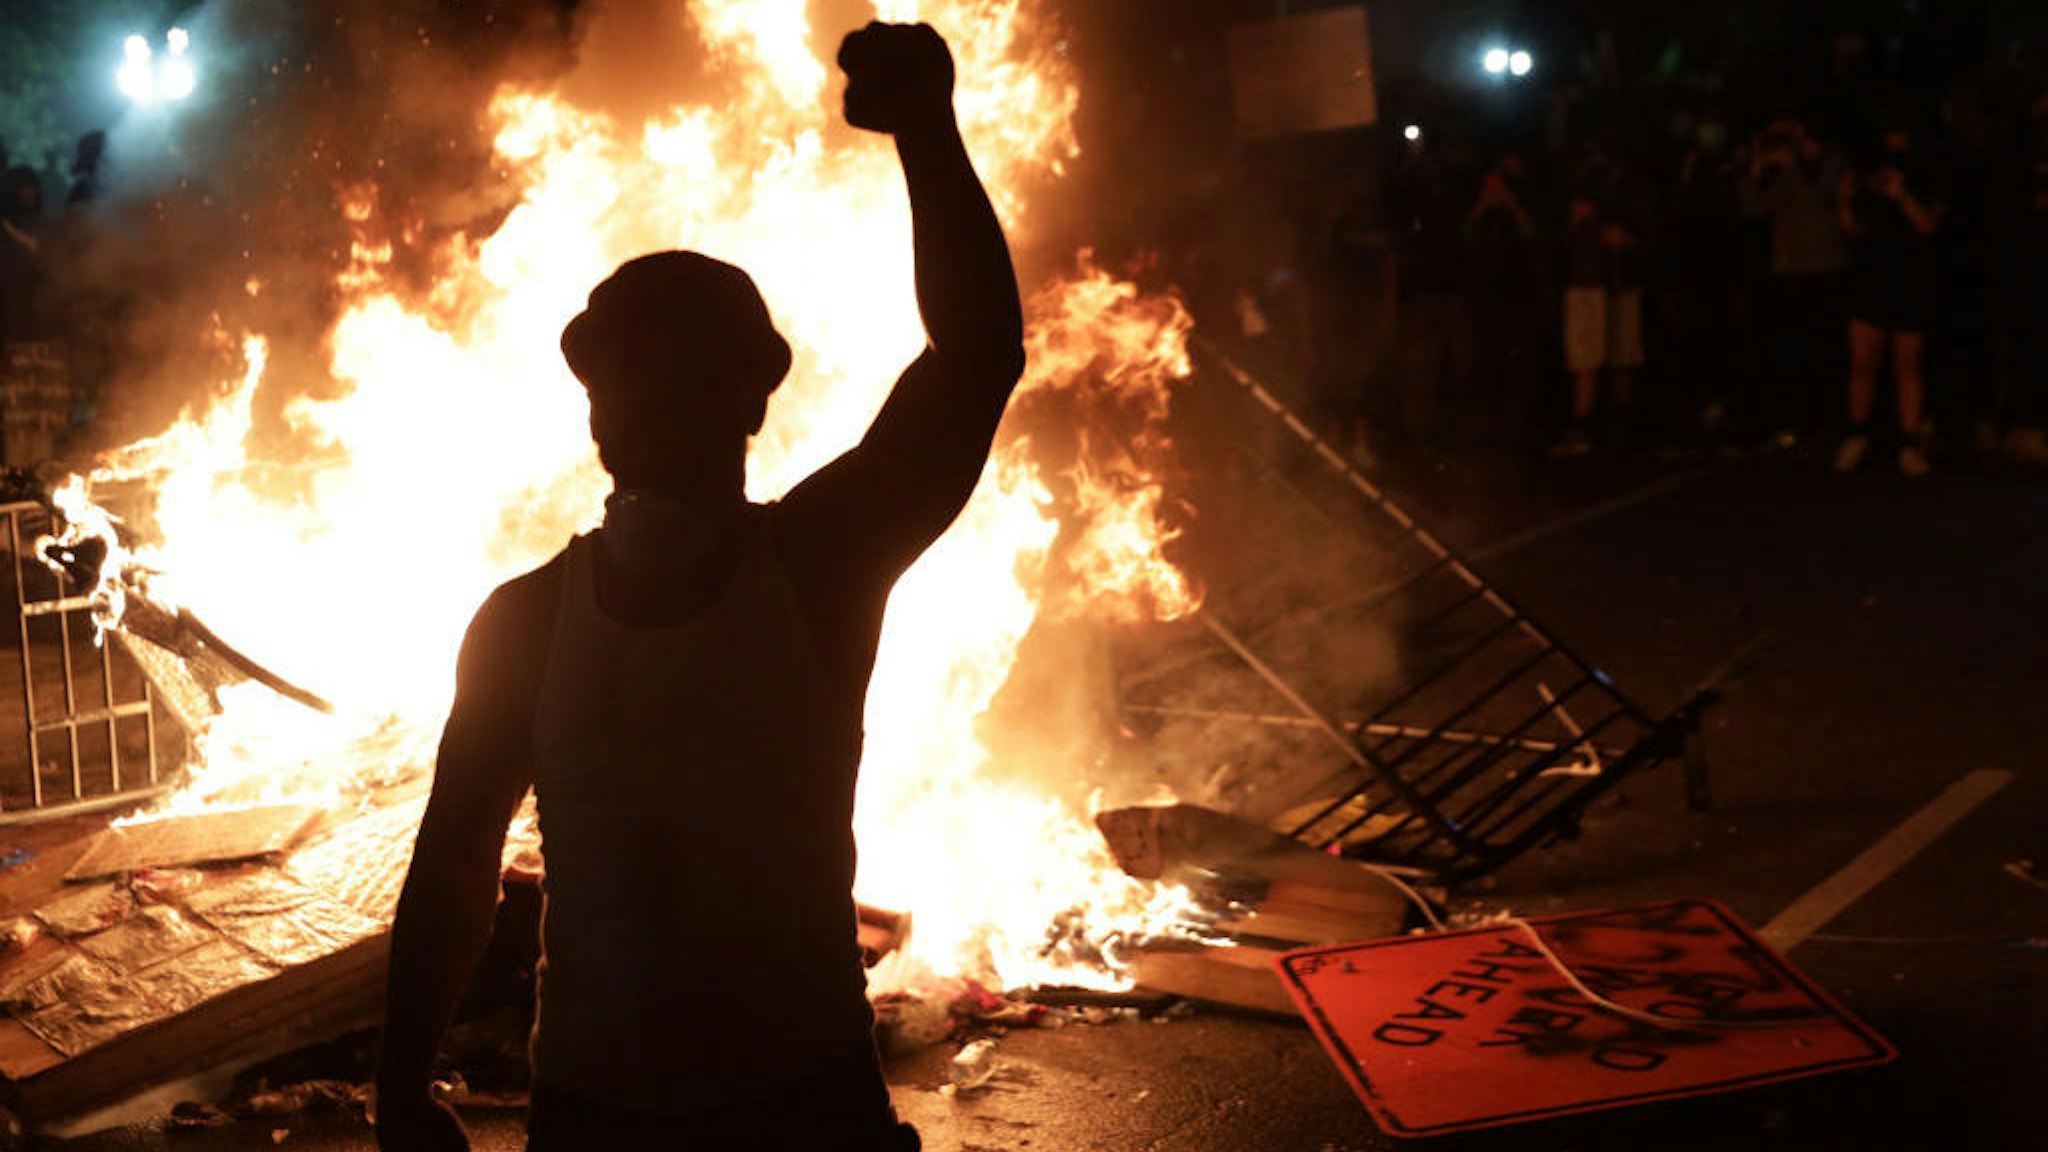 WASHINGTON, DC - MAY 31: Demonstrators stand around a fire during a protest near the White House in response to the killing of George Floyd May 31, 2020 in Washington, DC. Former Minneapolis police officer Derek Chauvin was fired then arrested for Floyd's death and is accused of killing Floyd by kneeling on his neck. Chauvin and three other officers, Tou Thao, J Alexander Kueng and Thomas K. Lane, were involved in Floyd's arrest on an accusation of "forgery-in-progress". (Photo by Alex Wong/Getty Images)